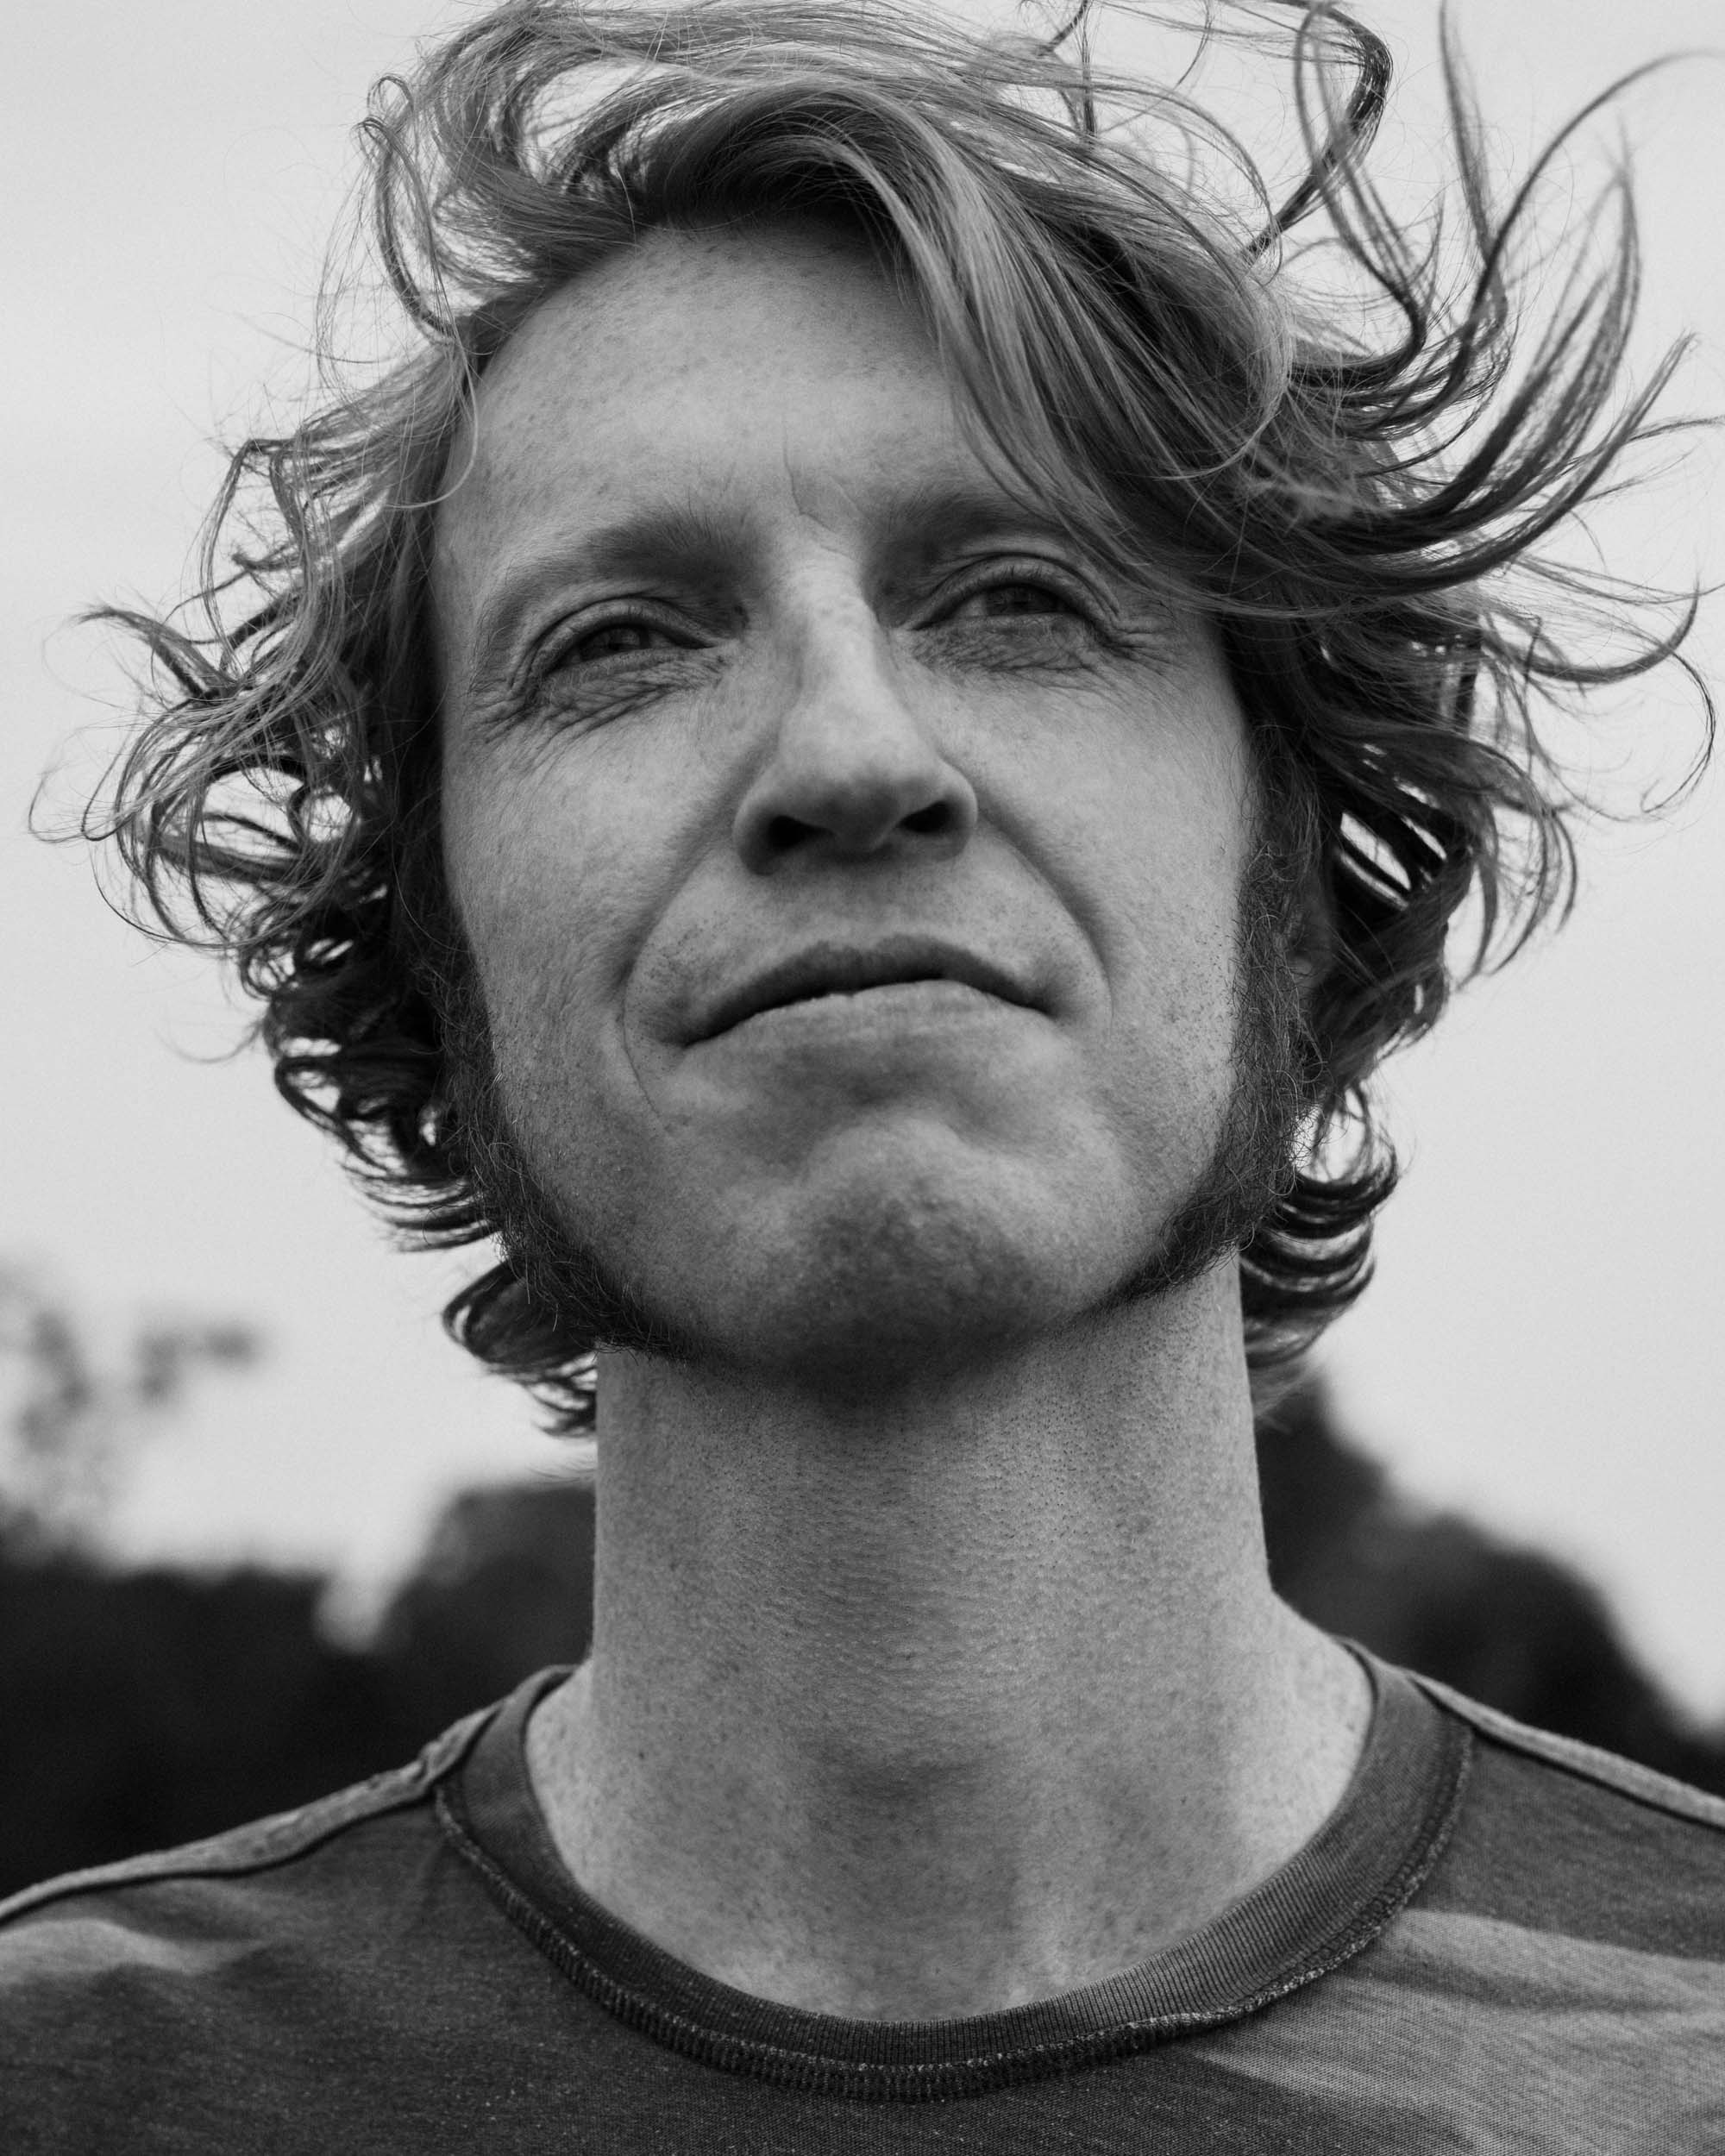 A white man seen from below, gazing off into the distance. He has unkempt hair that swoops down across his forehead in this black and white photo. 